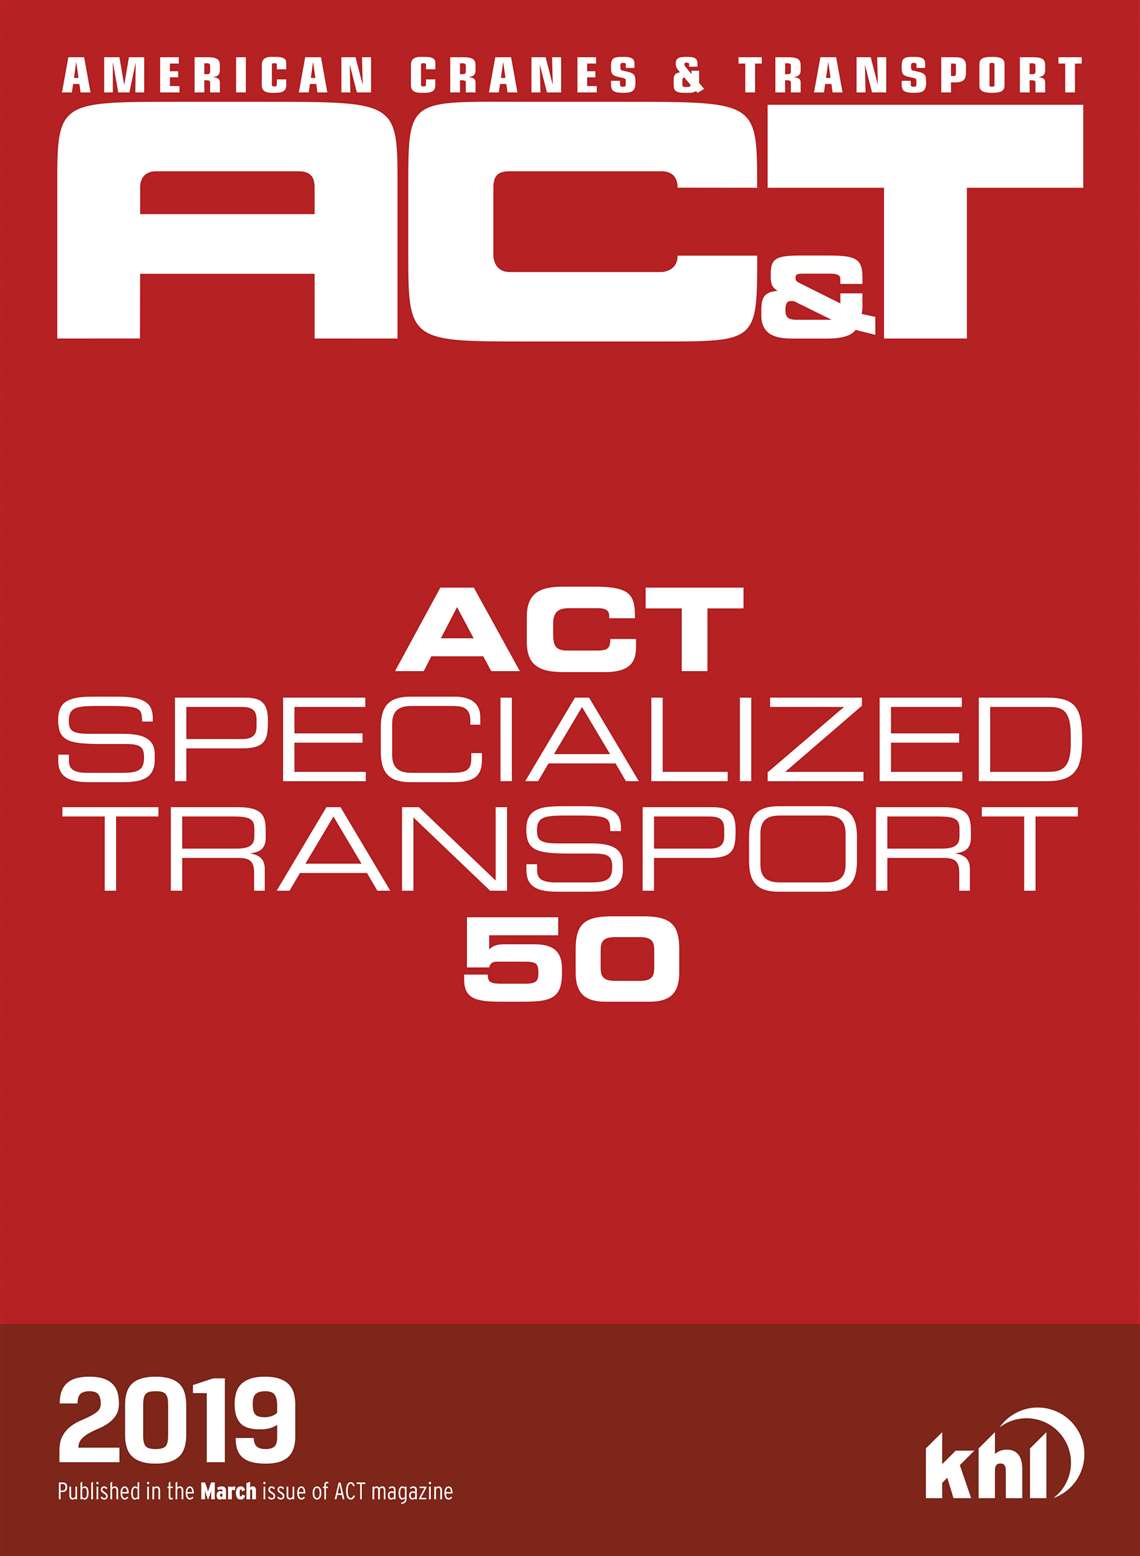 ACT-Specialised-Lifting-50-2019-1